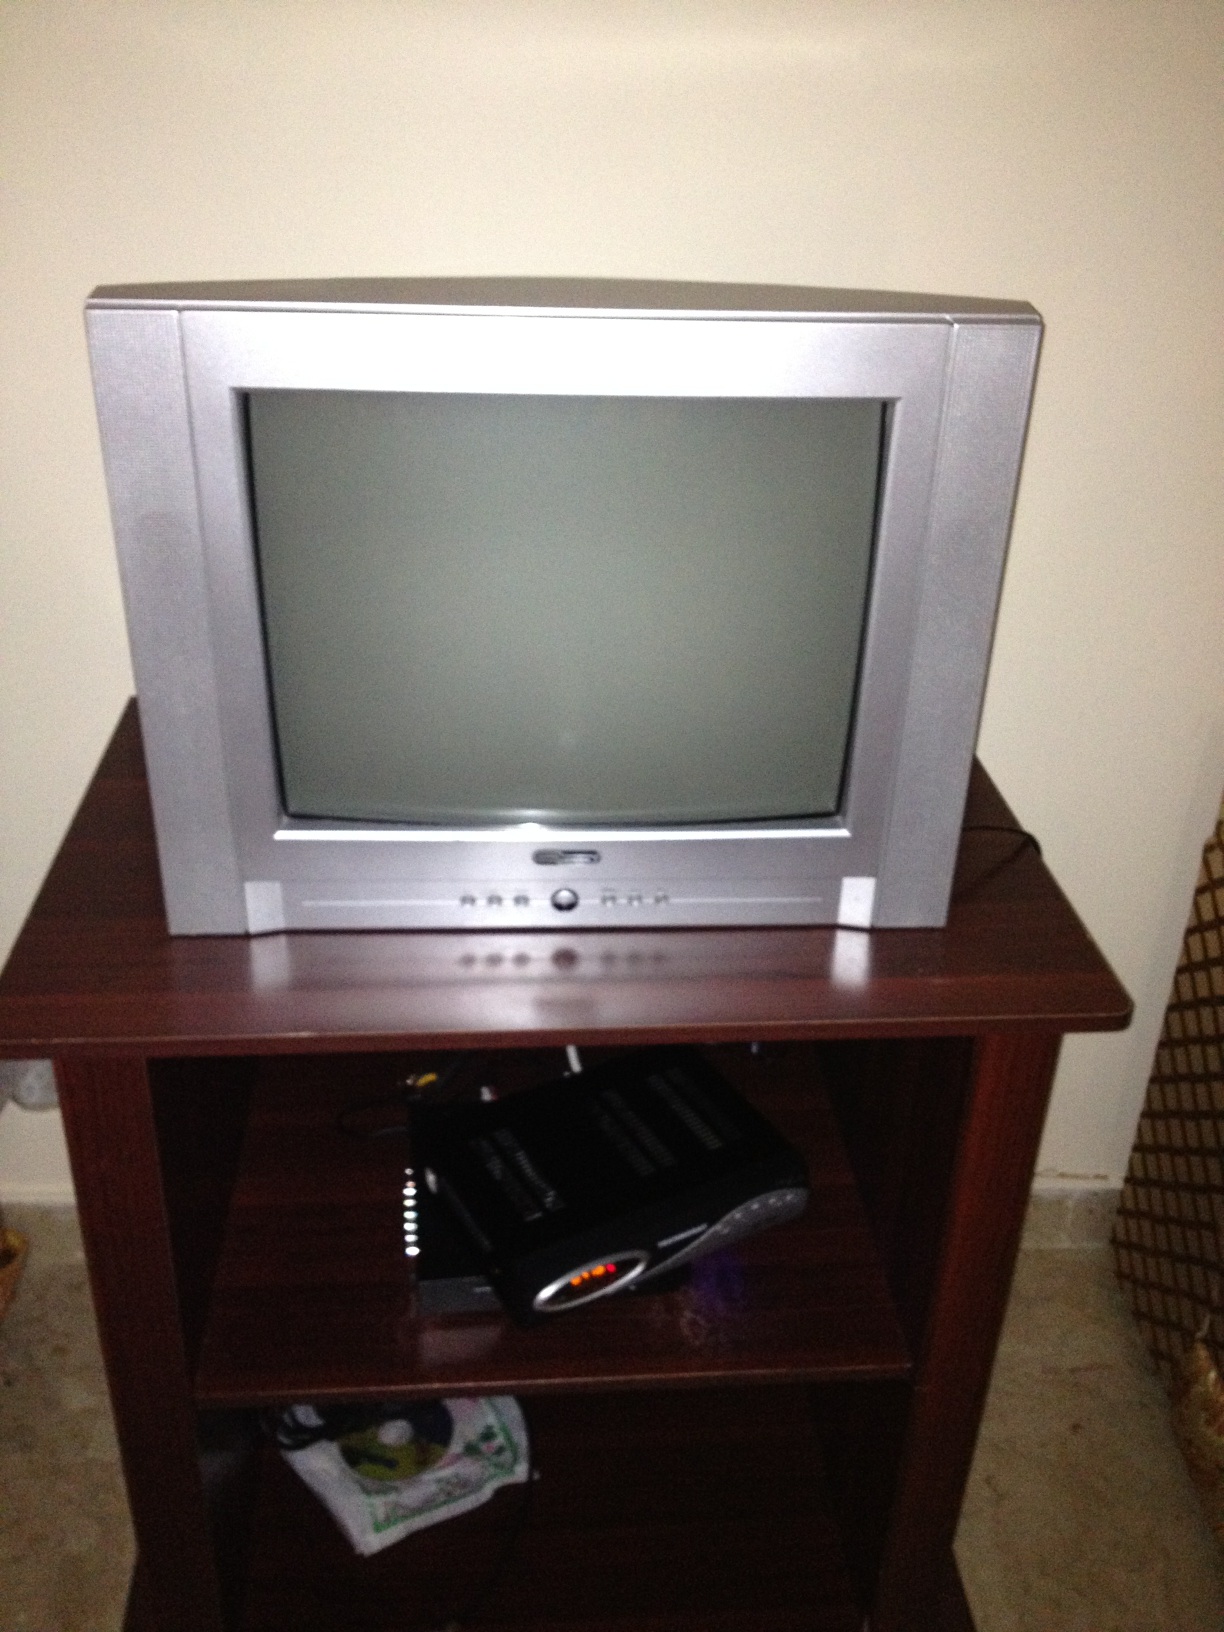 A photo captured by a person who is blind. A computer-generated caption for this photo is: A television sitting on top of a wooden table.